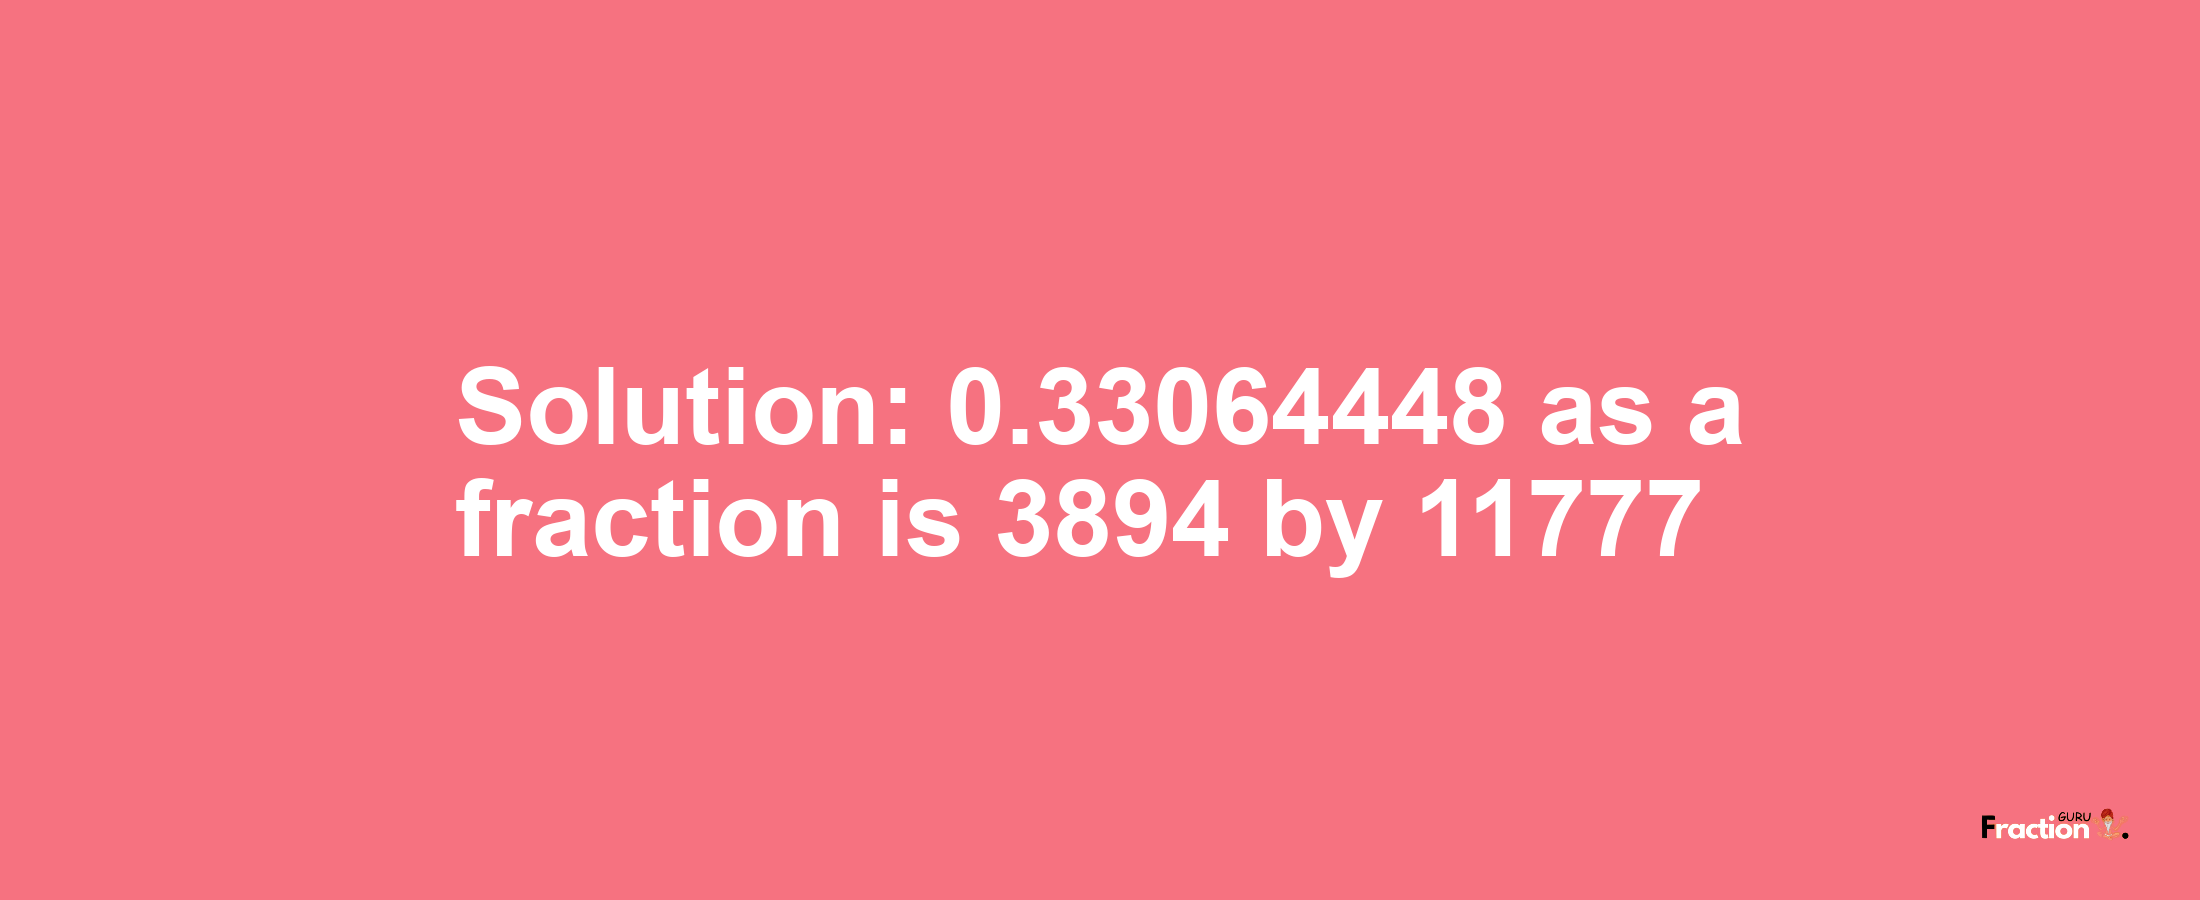 Solution:0.33064448 as a fraction is 3894/11777